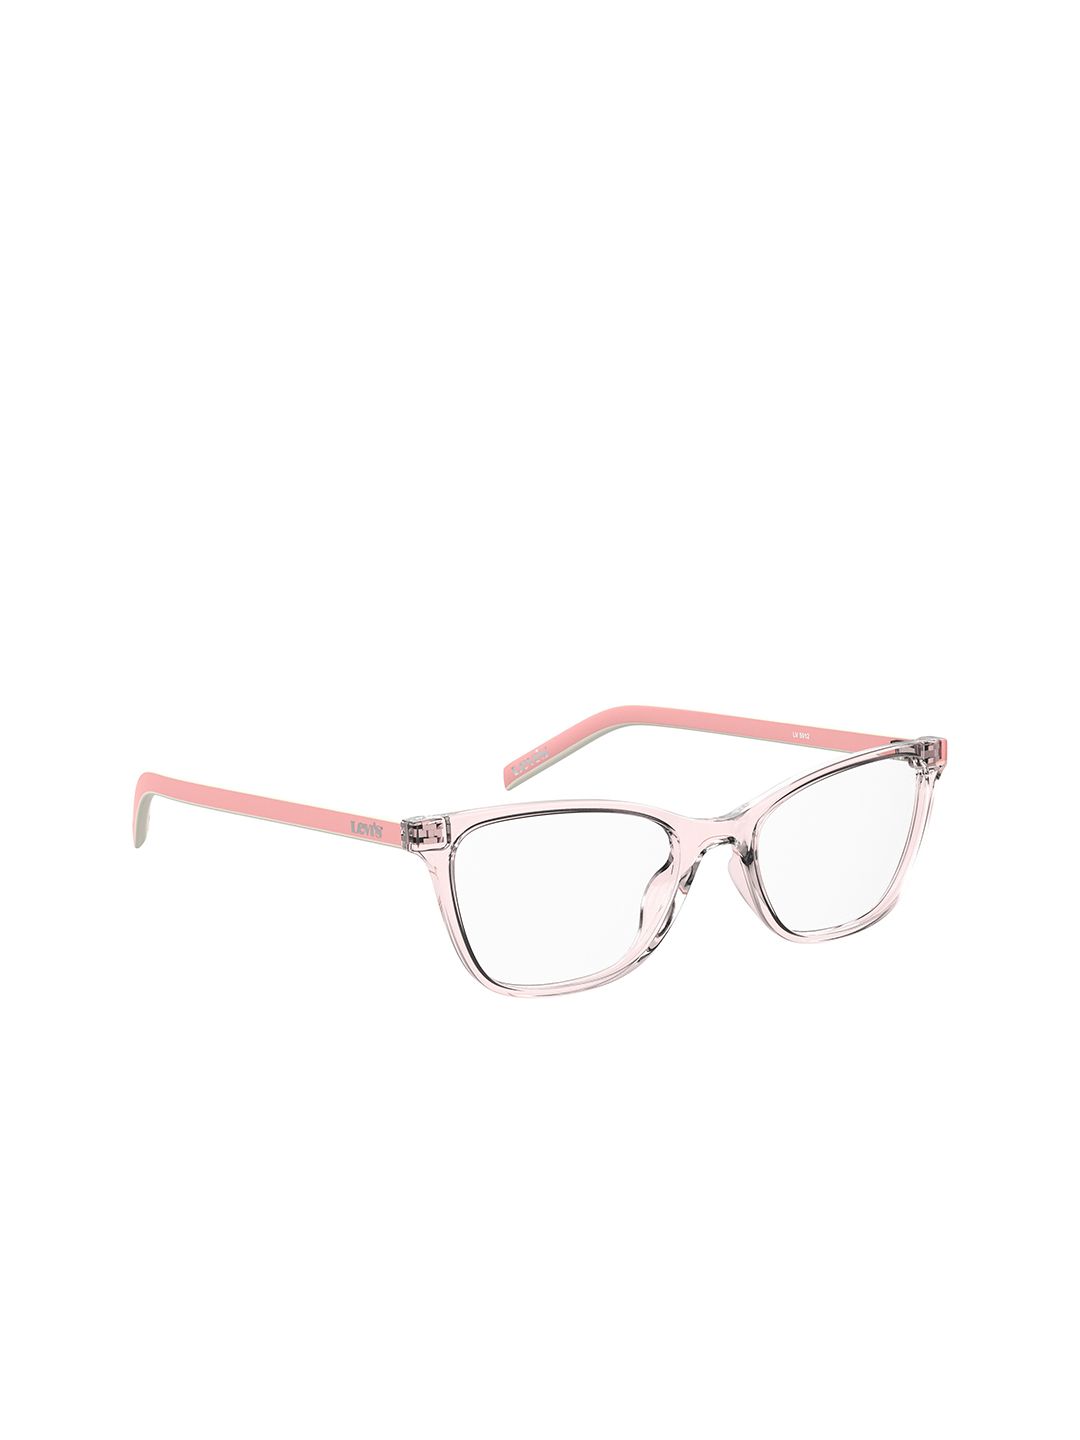 Levis Women Clear Lens & Pink Aviator Sunglasses with Polarised Lens Price in India